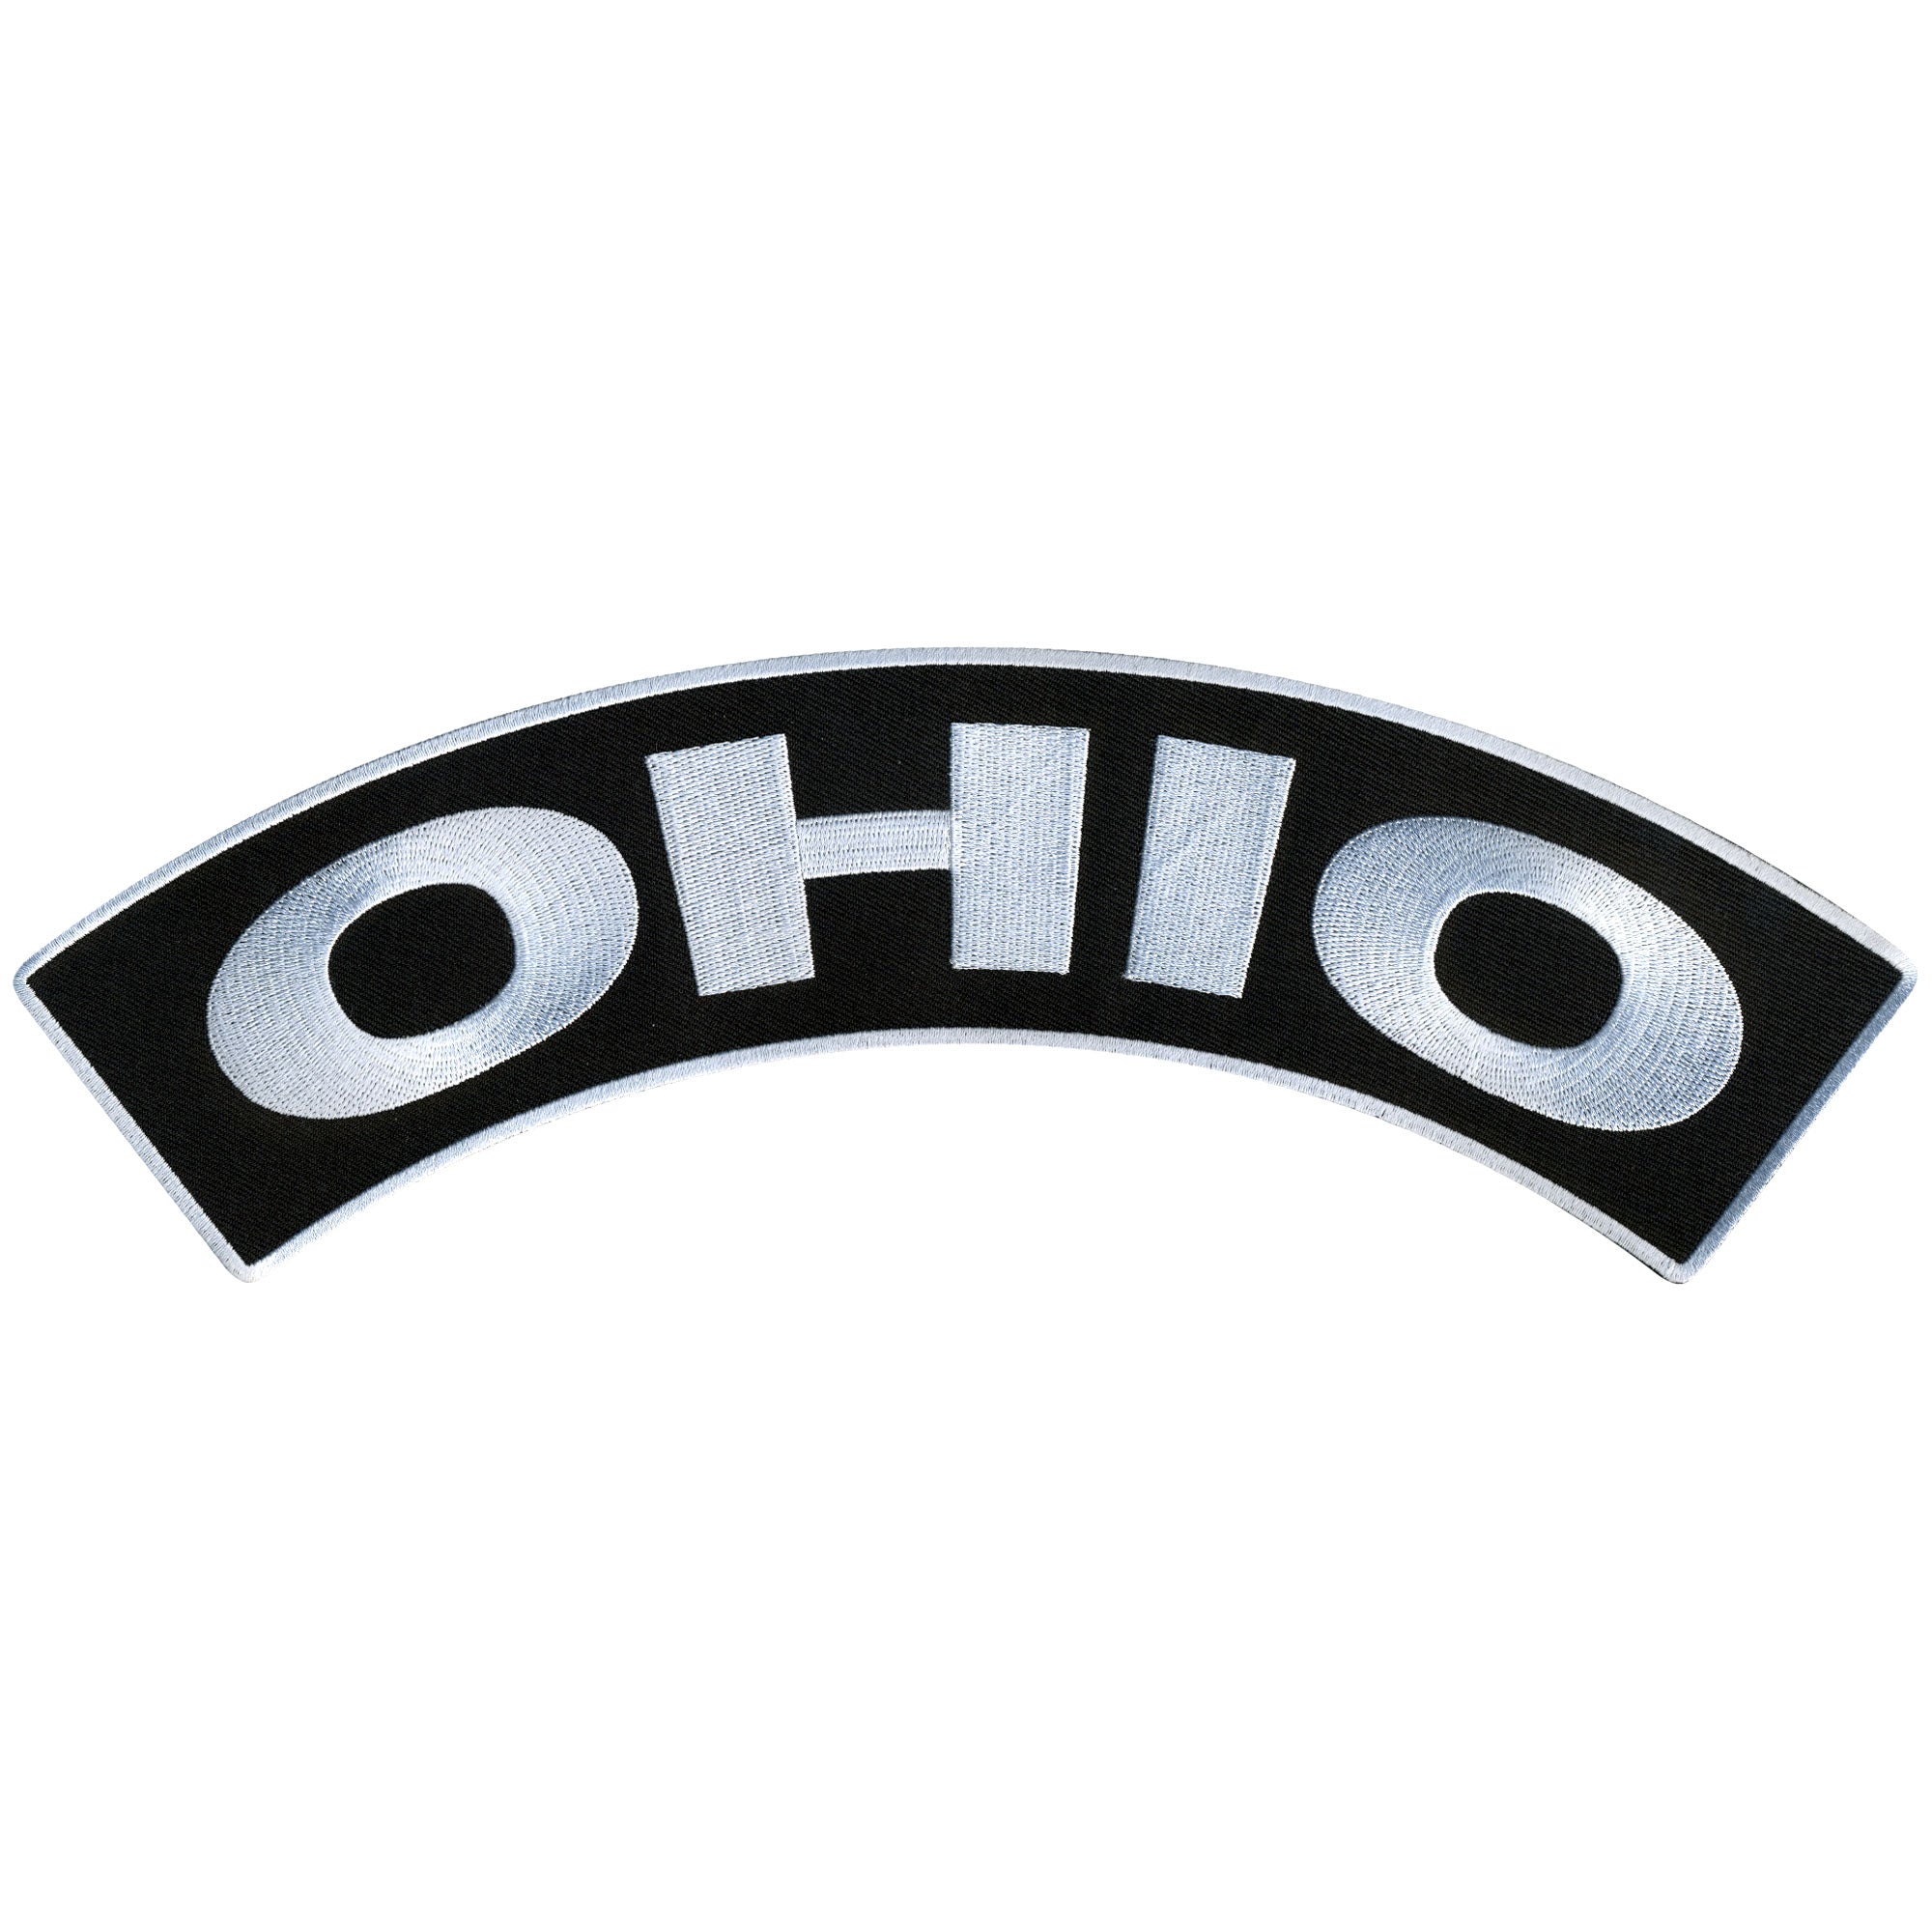 Hot Leathers Ohio 12” X 3” Top Rocker Patch